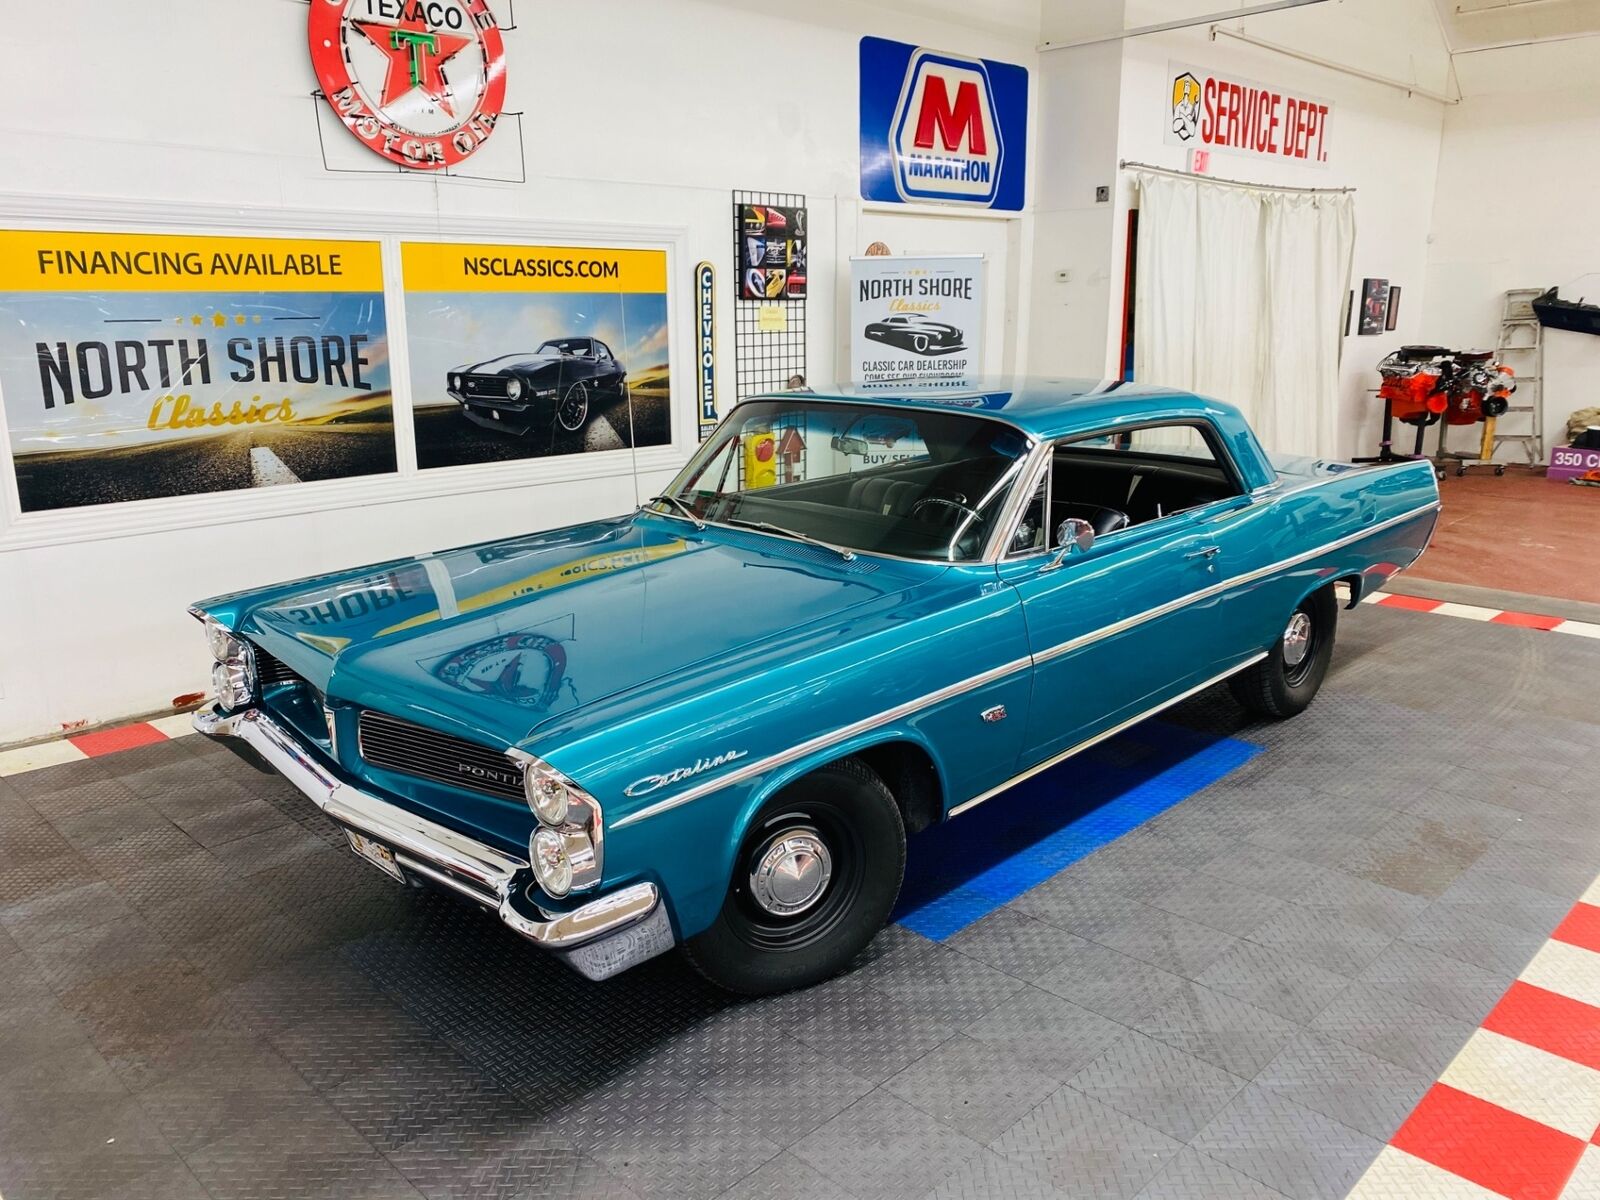 1963 Pontiac Catalina - 428 Engine - Tri Power -  4 Speed - See Video Pontiac Catalina Teal With 22,155 Miles, For Sale!